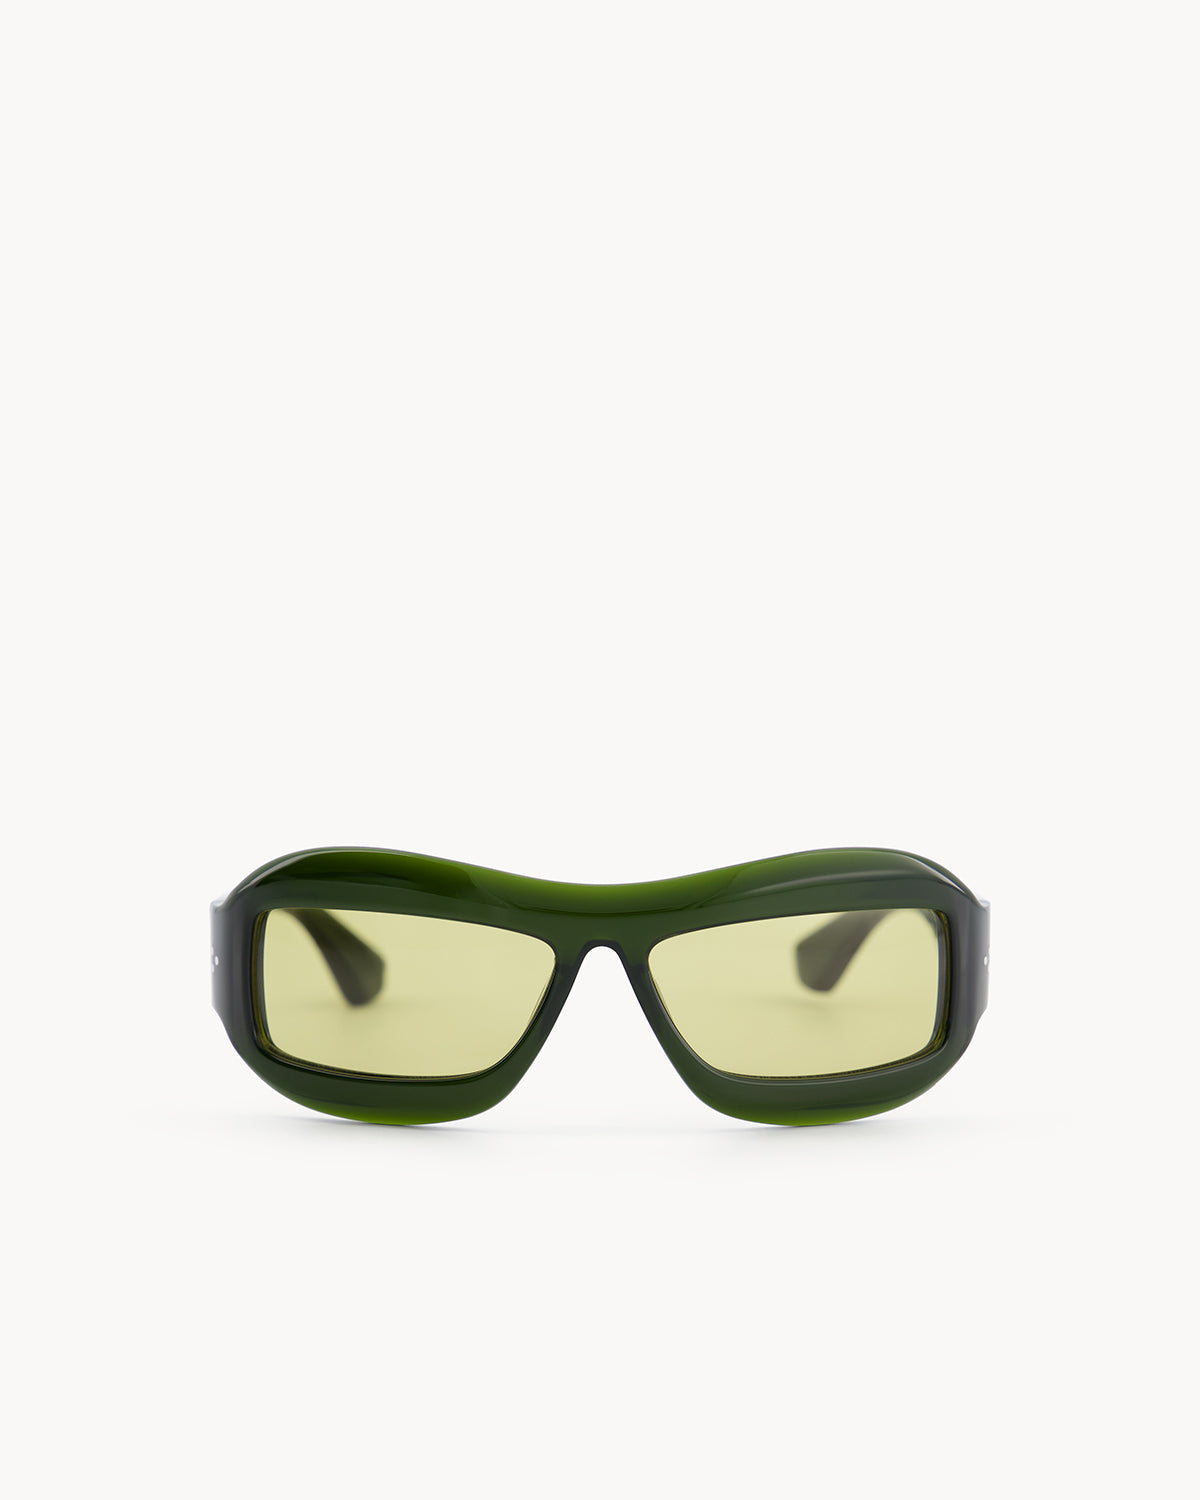 Port Tanger Zarin Sunglasses in Cardamom Acetate and Warm Olive Lenses 1